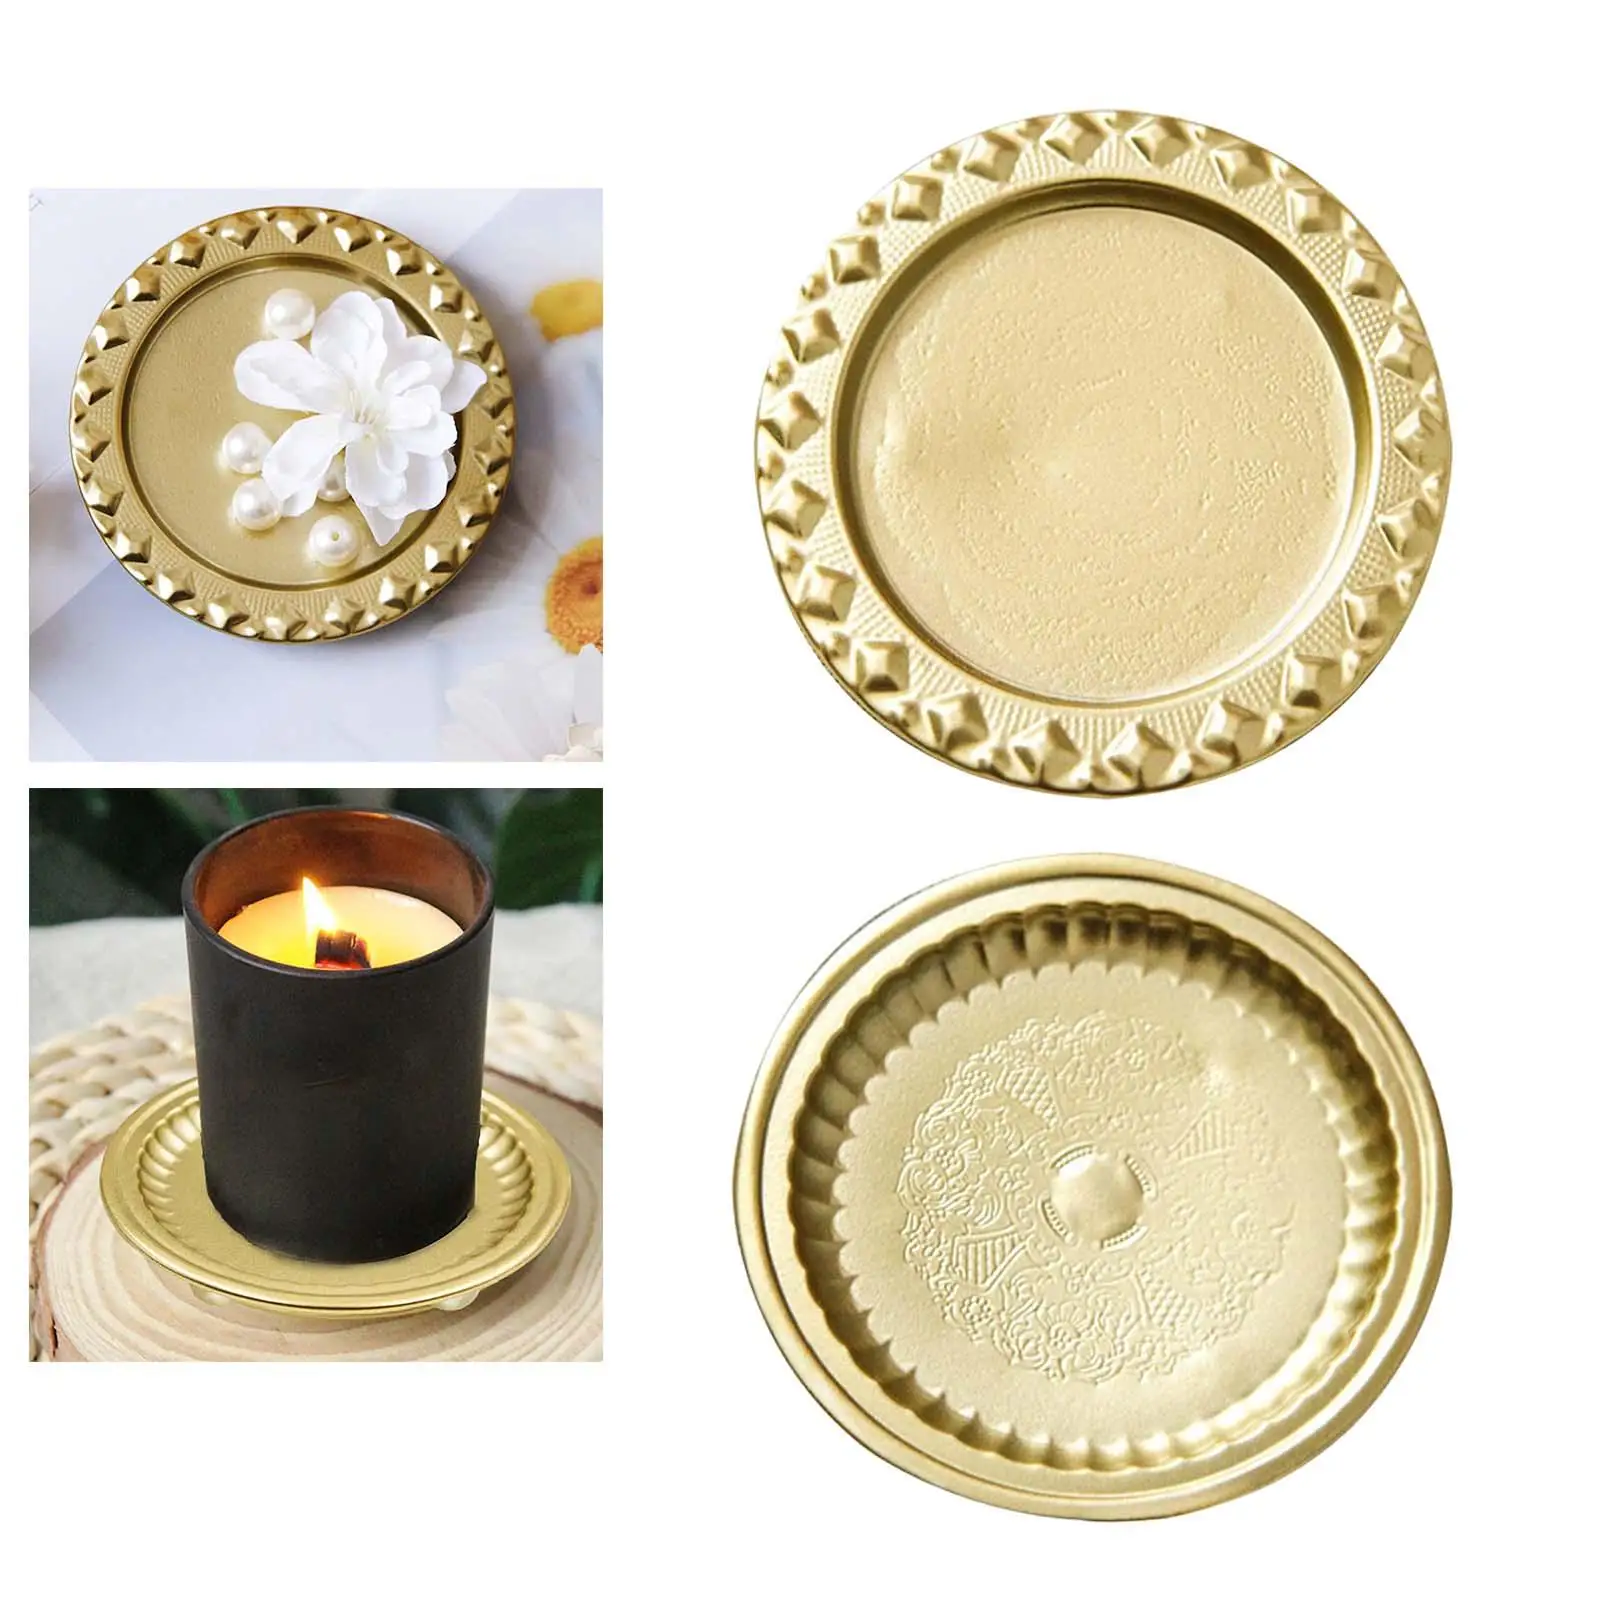 Golden Plate Candle Holder with Bottom Legs Diameter 10cm Table Party Decoration Sturdy Construction for Wax Candles Candle Tray